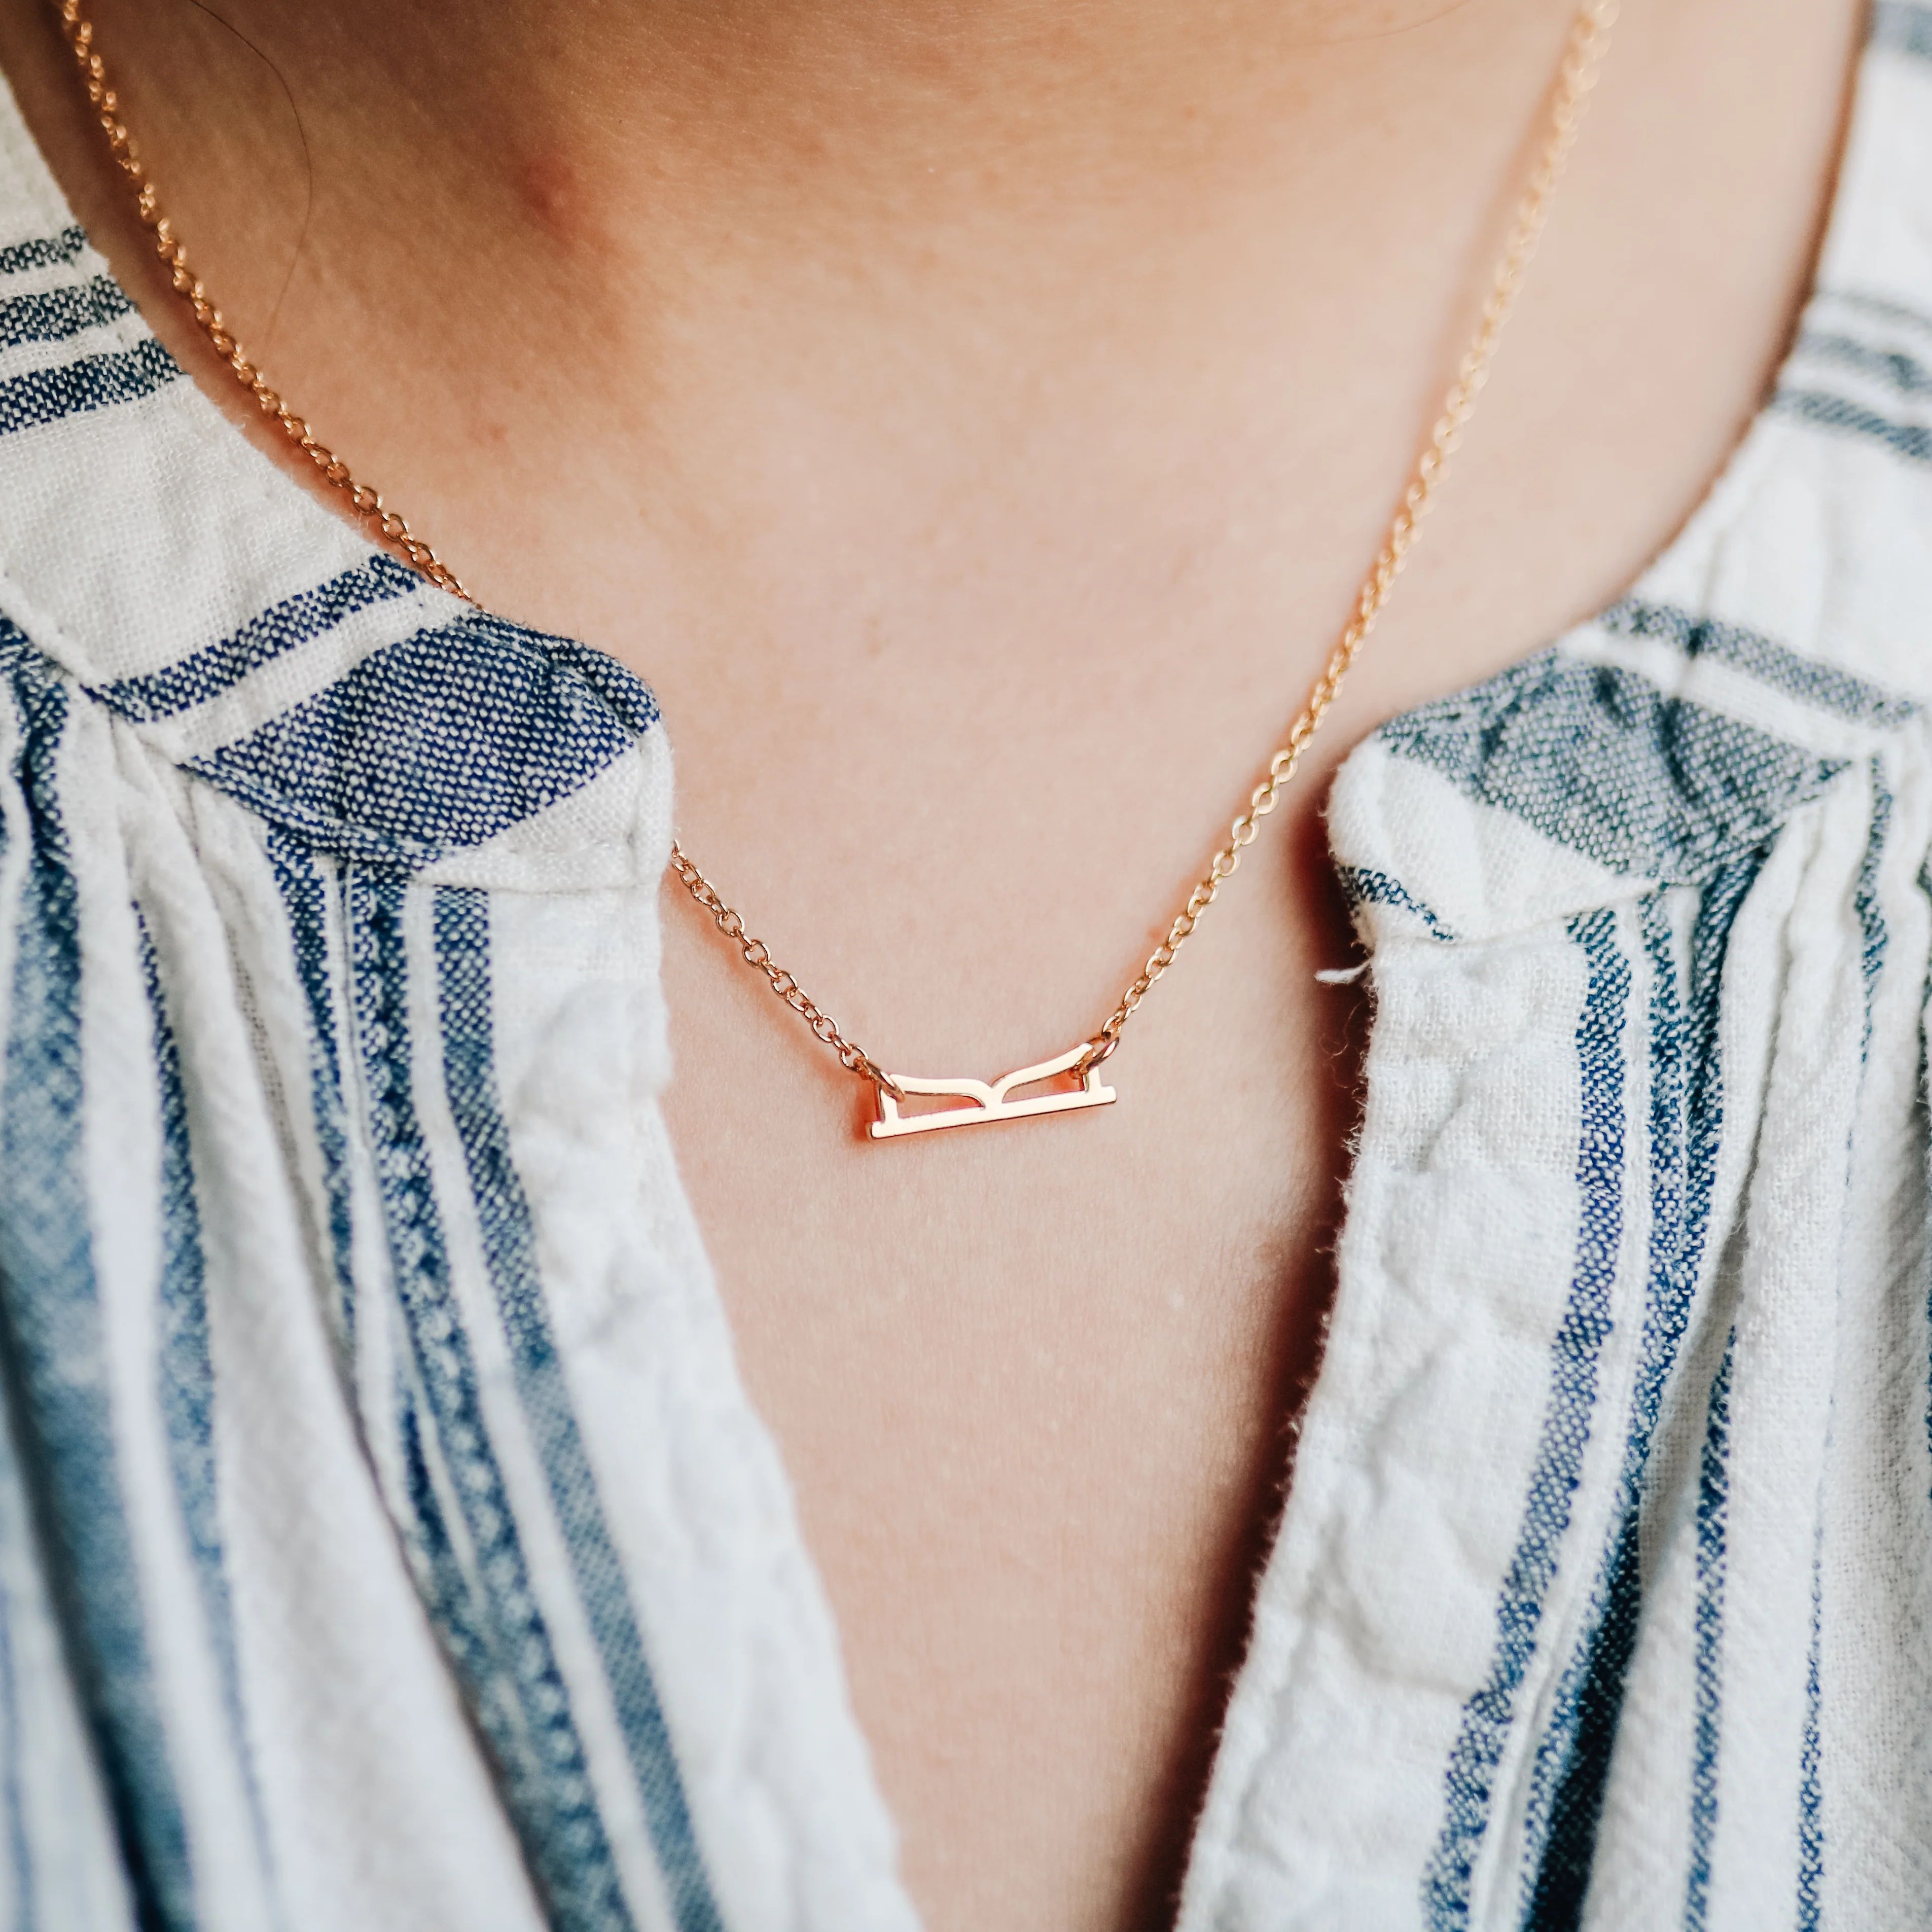 Dwell Necklace | The Daily Grace Co.